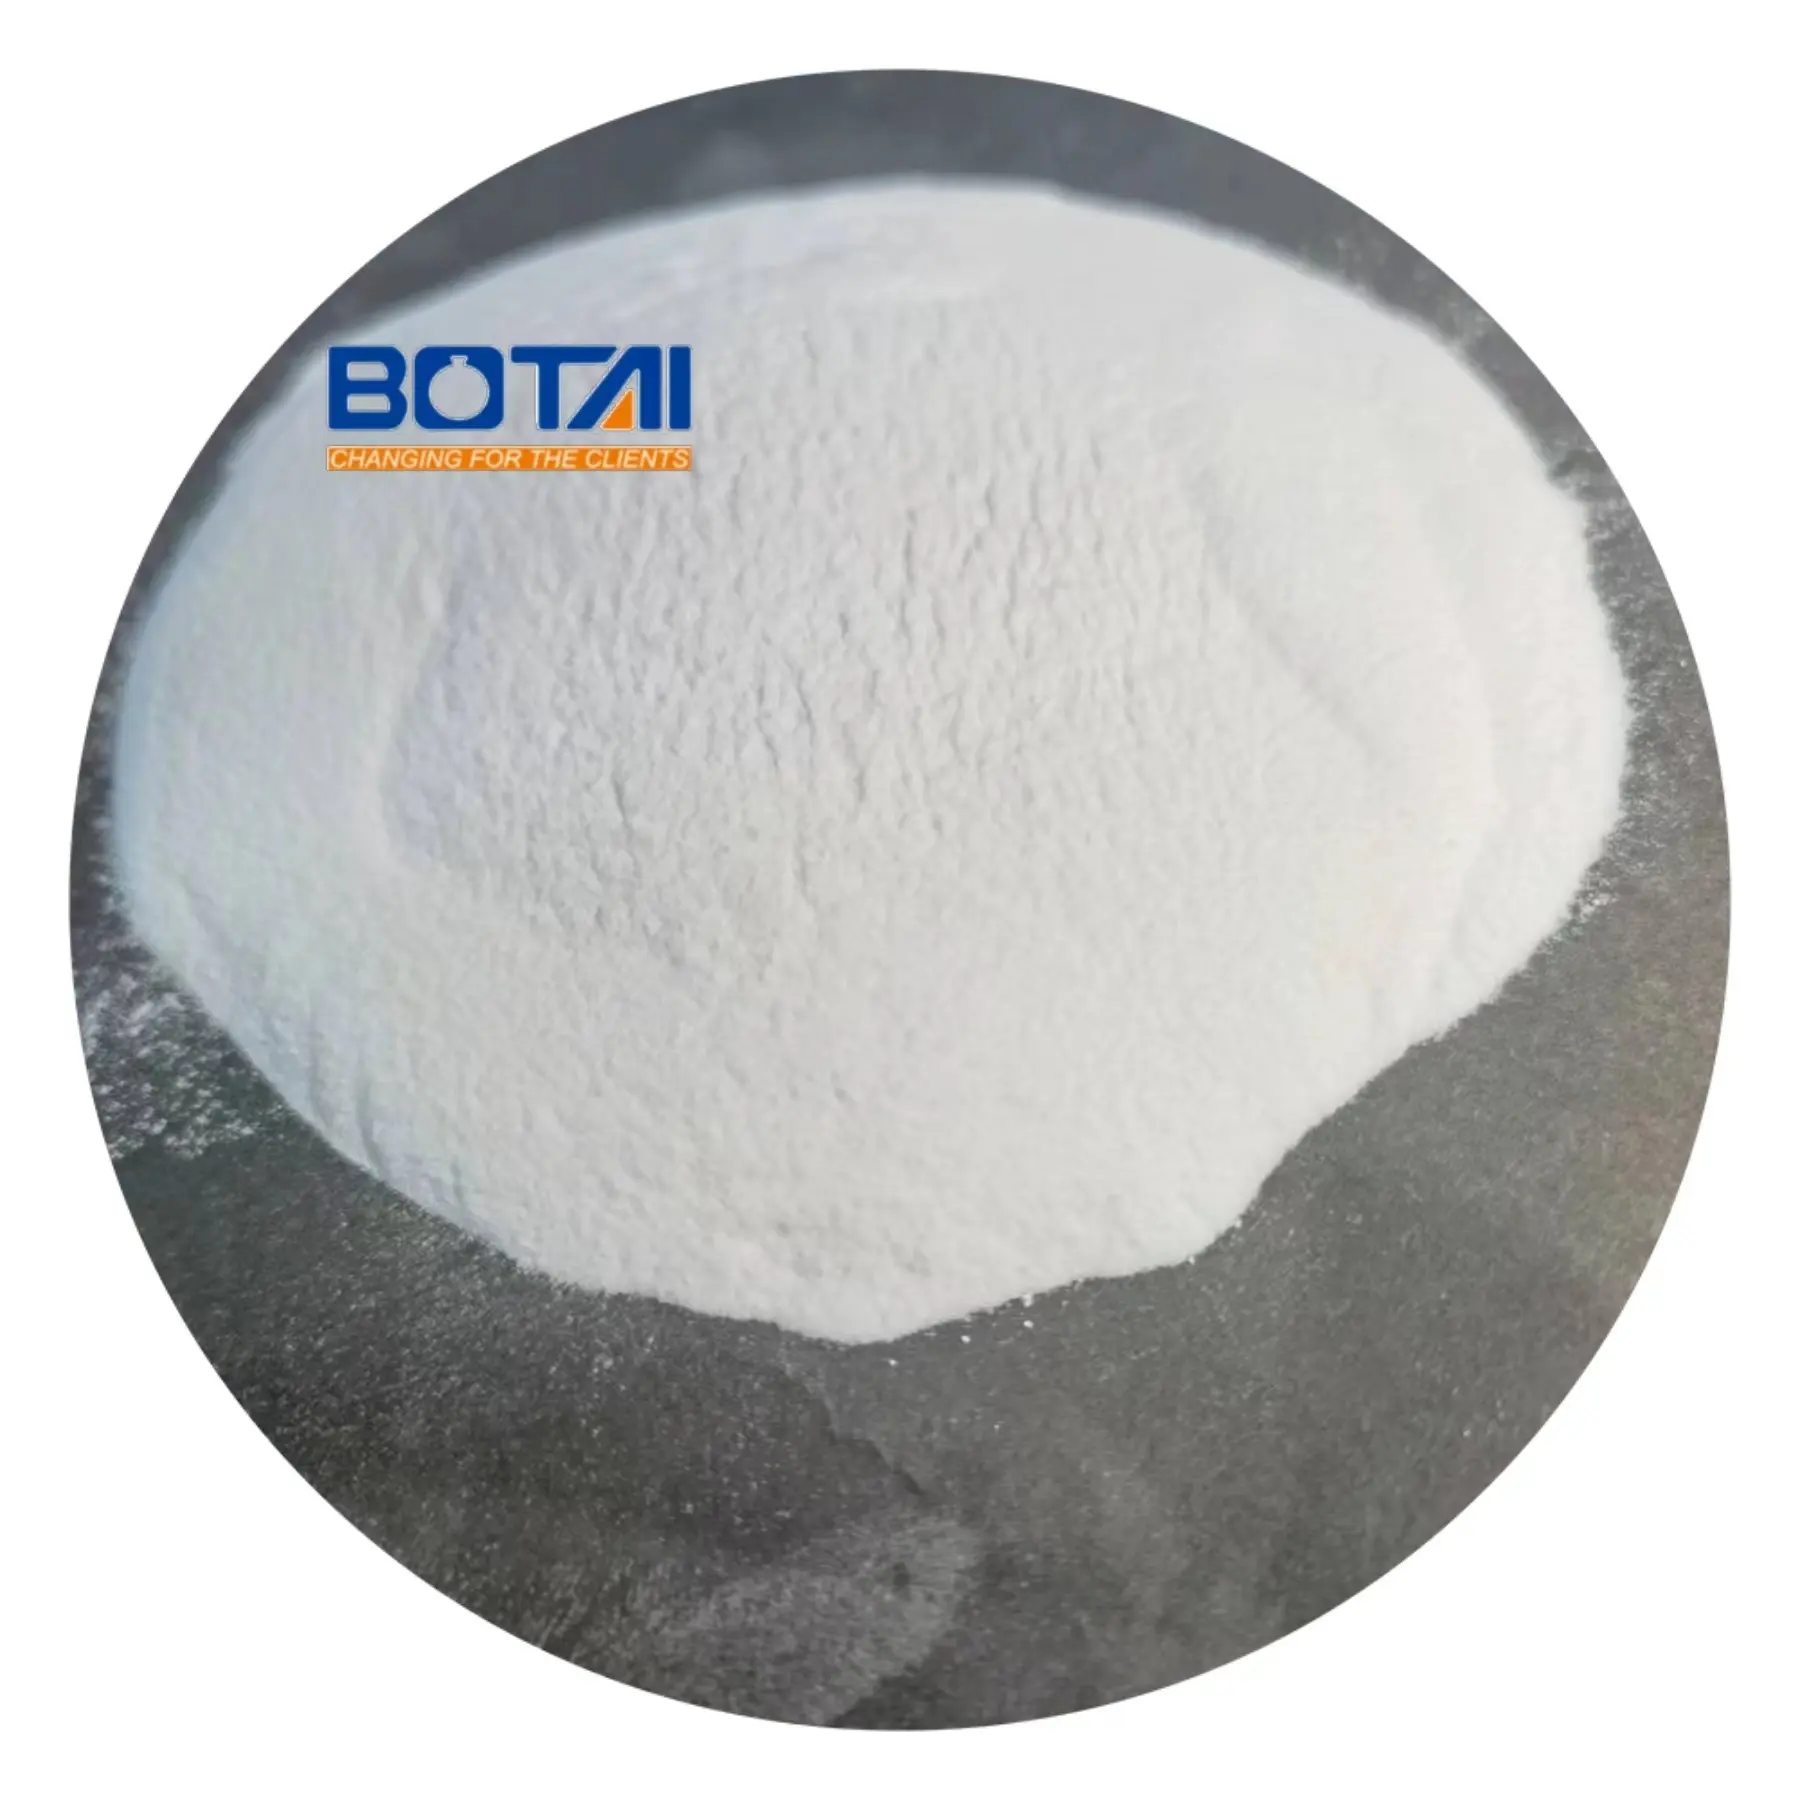 Powder Defoamer As Cement Based Mortar Chemical Additive Used For Self Leveling And Fluid Mortars